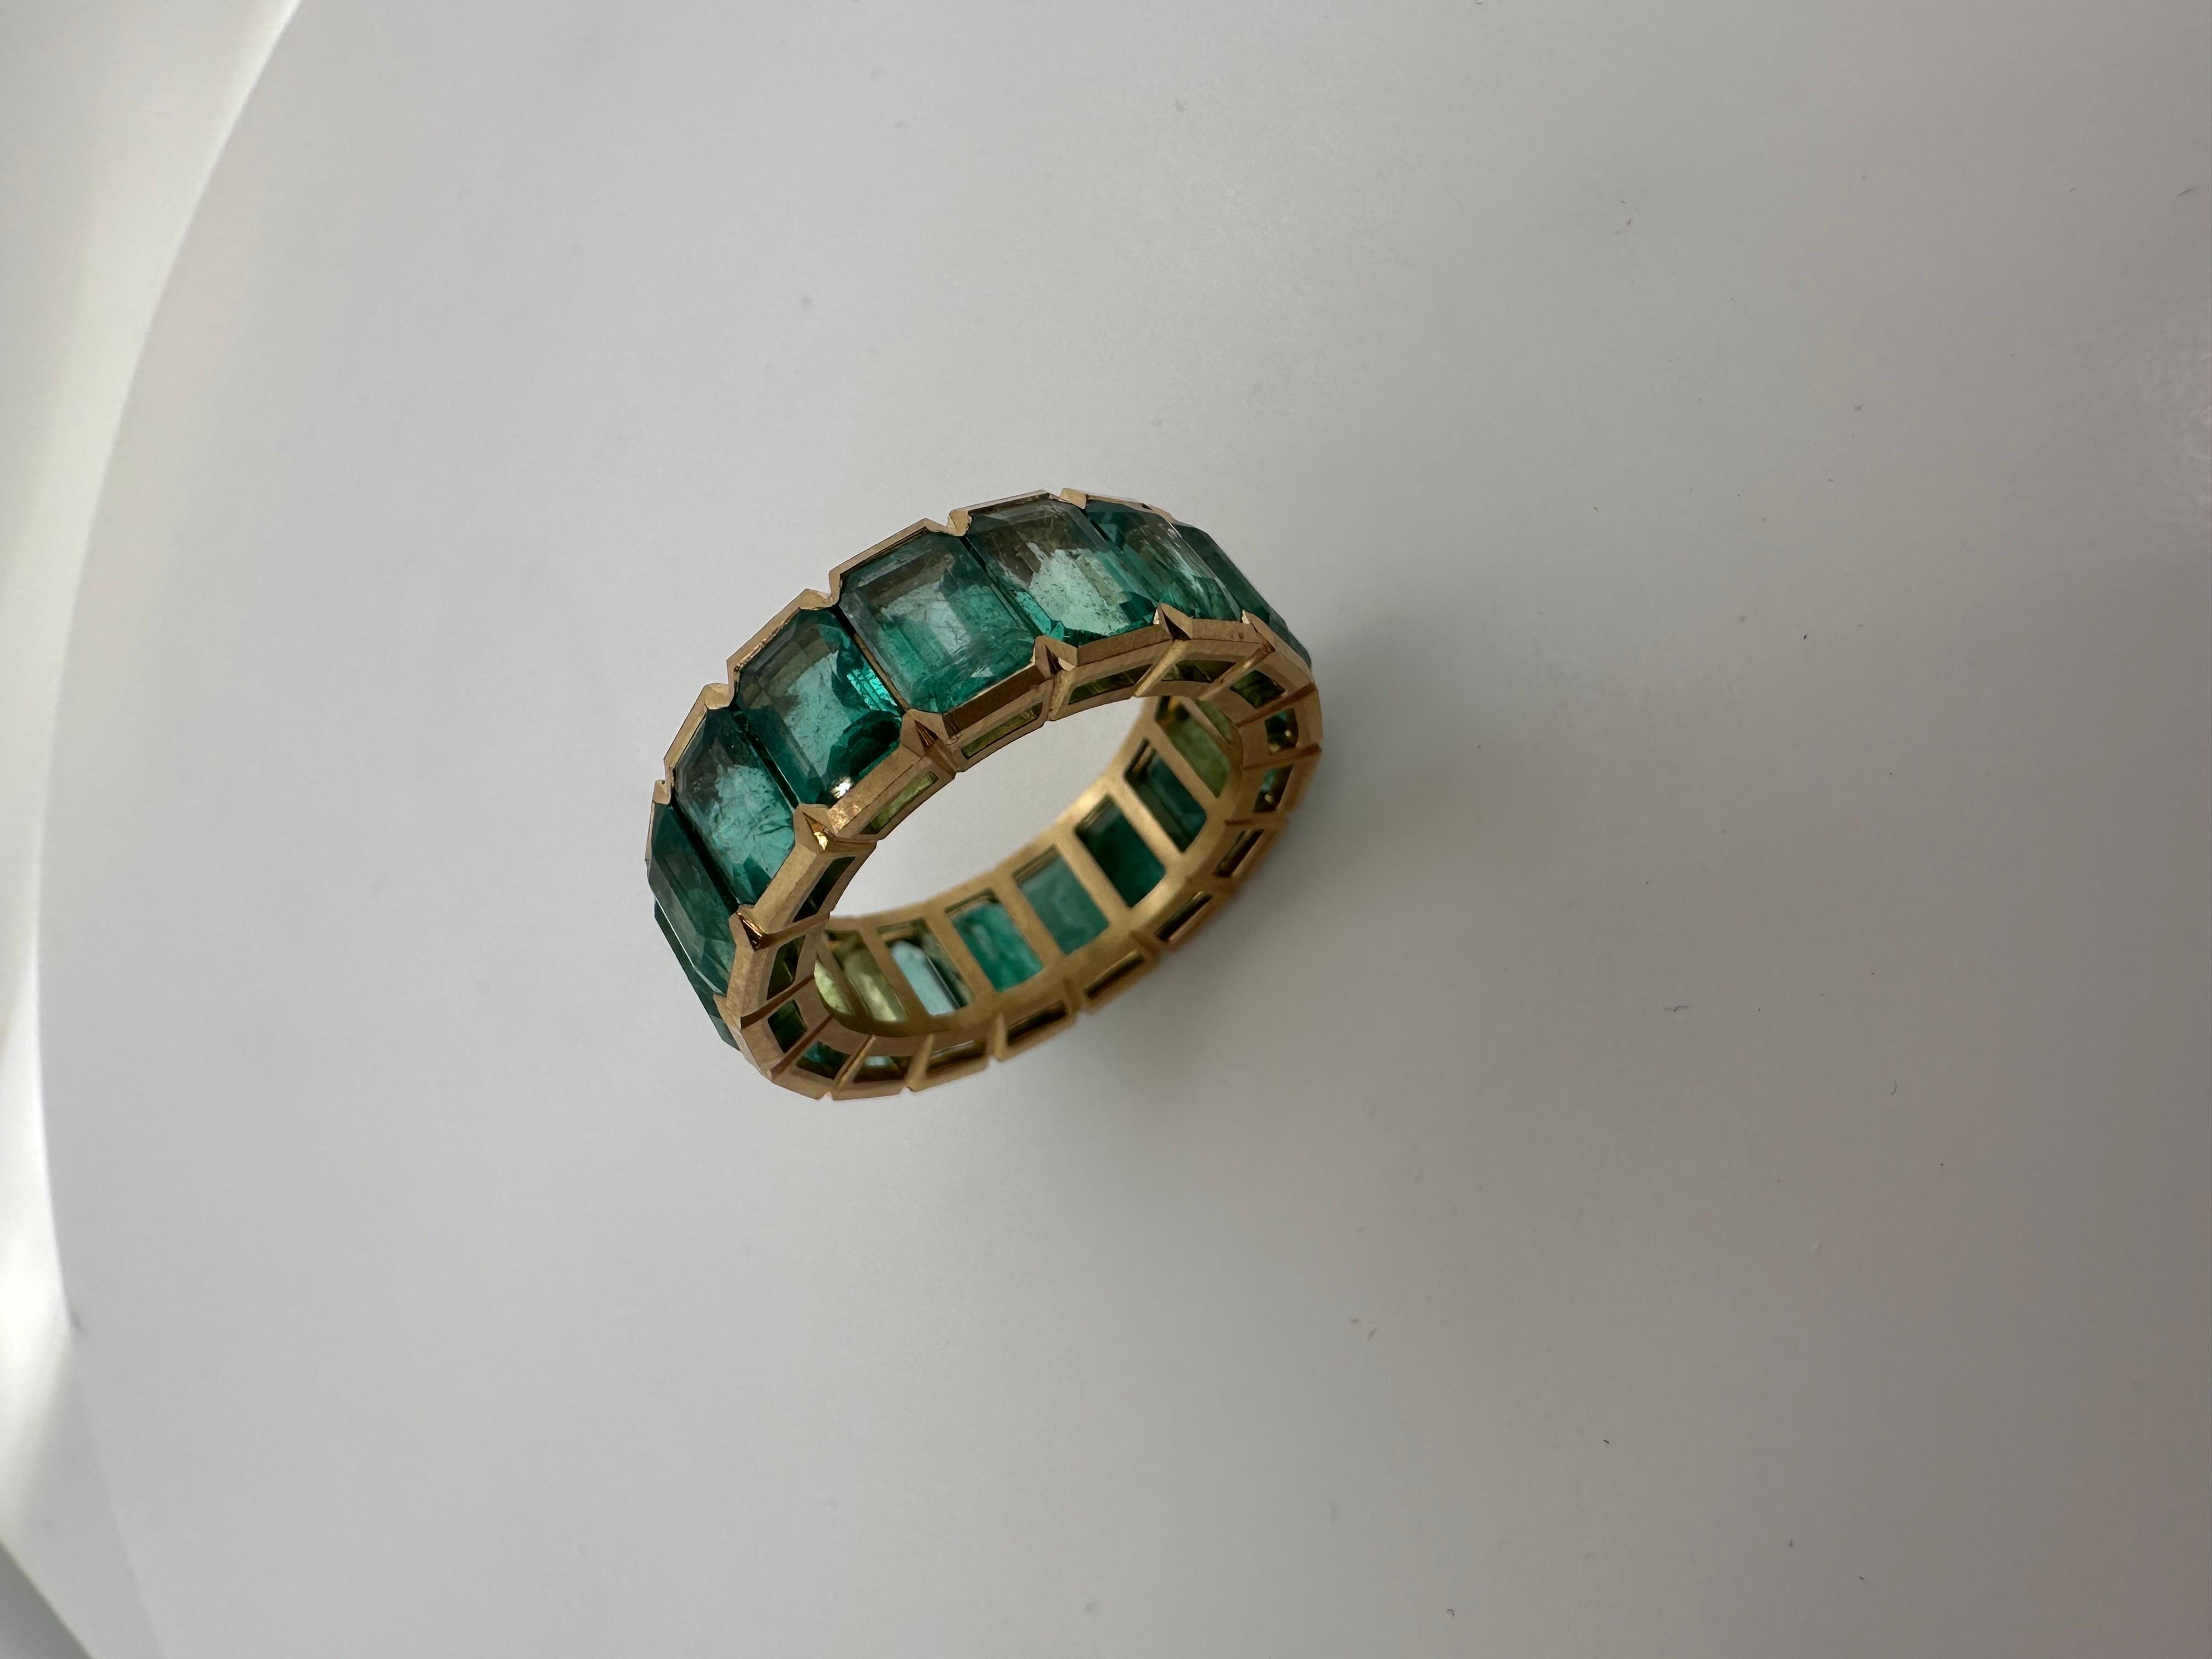 One of a kind Colombian emerald eternity ring made with natural bluish green emeralds in 18KT yellow gold with matte finish for that extra character! Very unique ring!

Metal Type: 18KT

Natural Emerald(s): 
Color: Bluish Green
Cut:Emerald